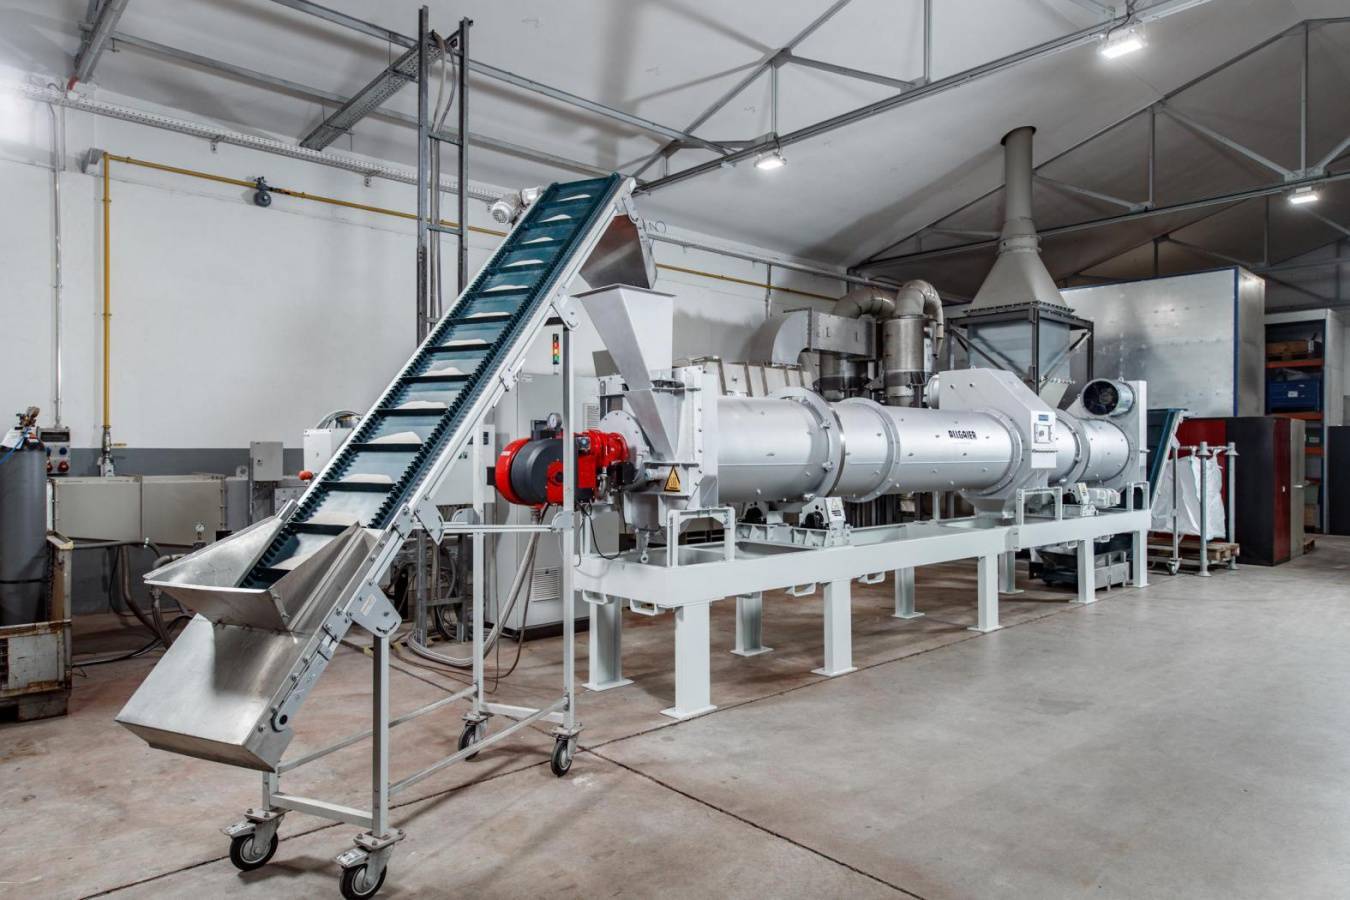 The new TK-D drum dryer / cooler system MOZER as a pilot plant in the Allgaier Test Center, Uhingen, Germany enables the solids to be dried to very low temperatures up to near ambient or cooling air temperatures